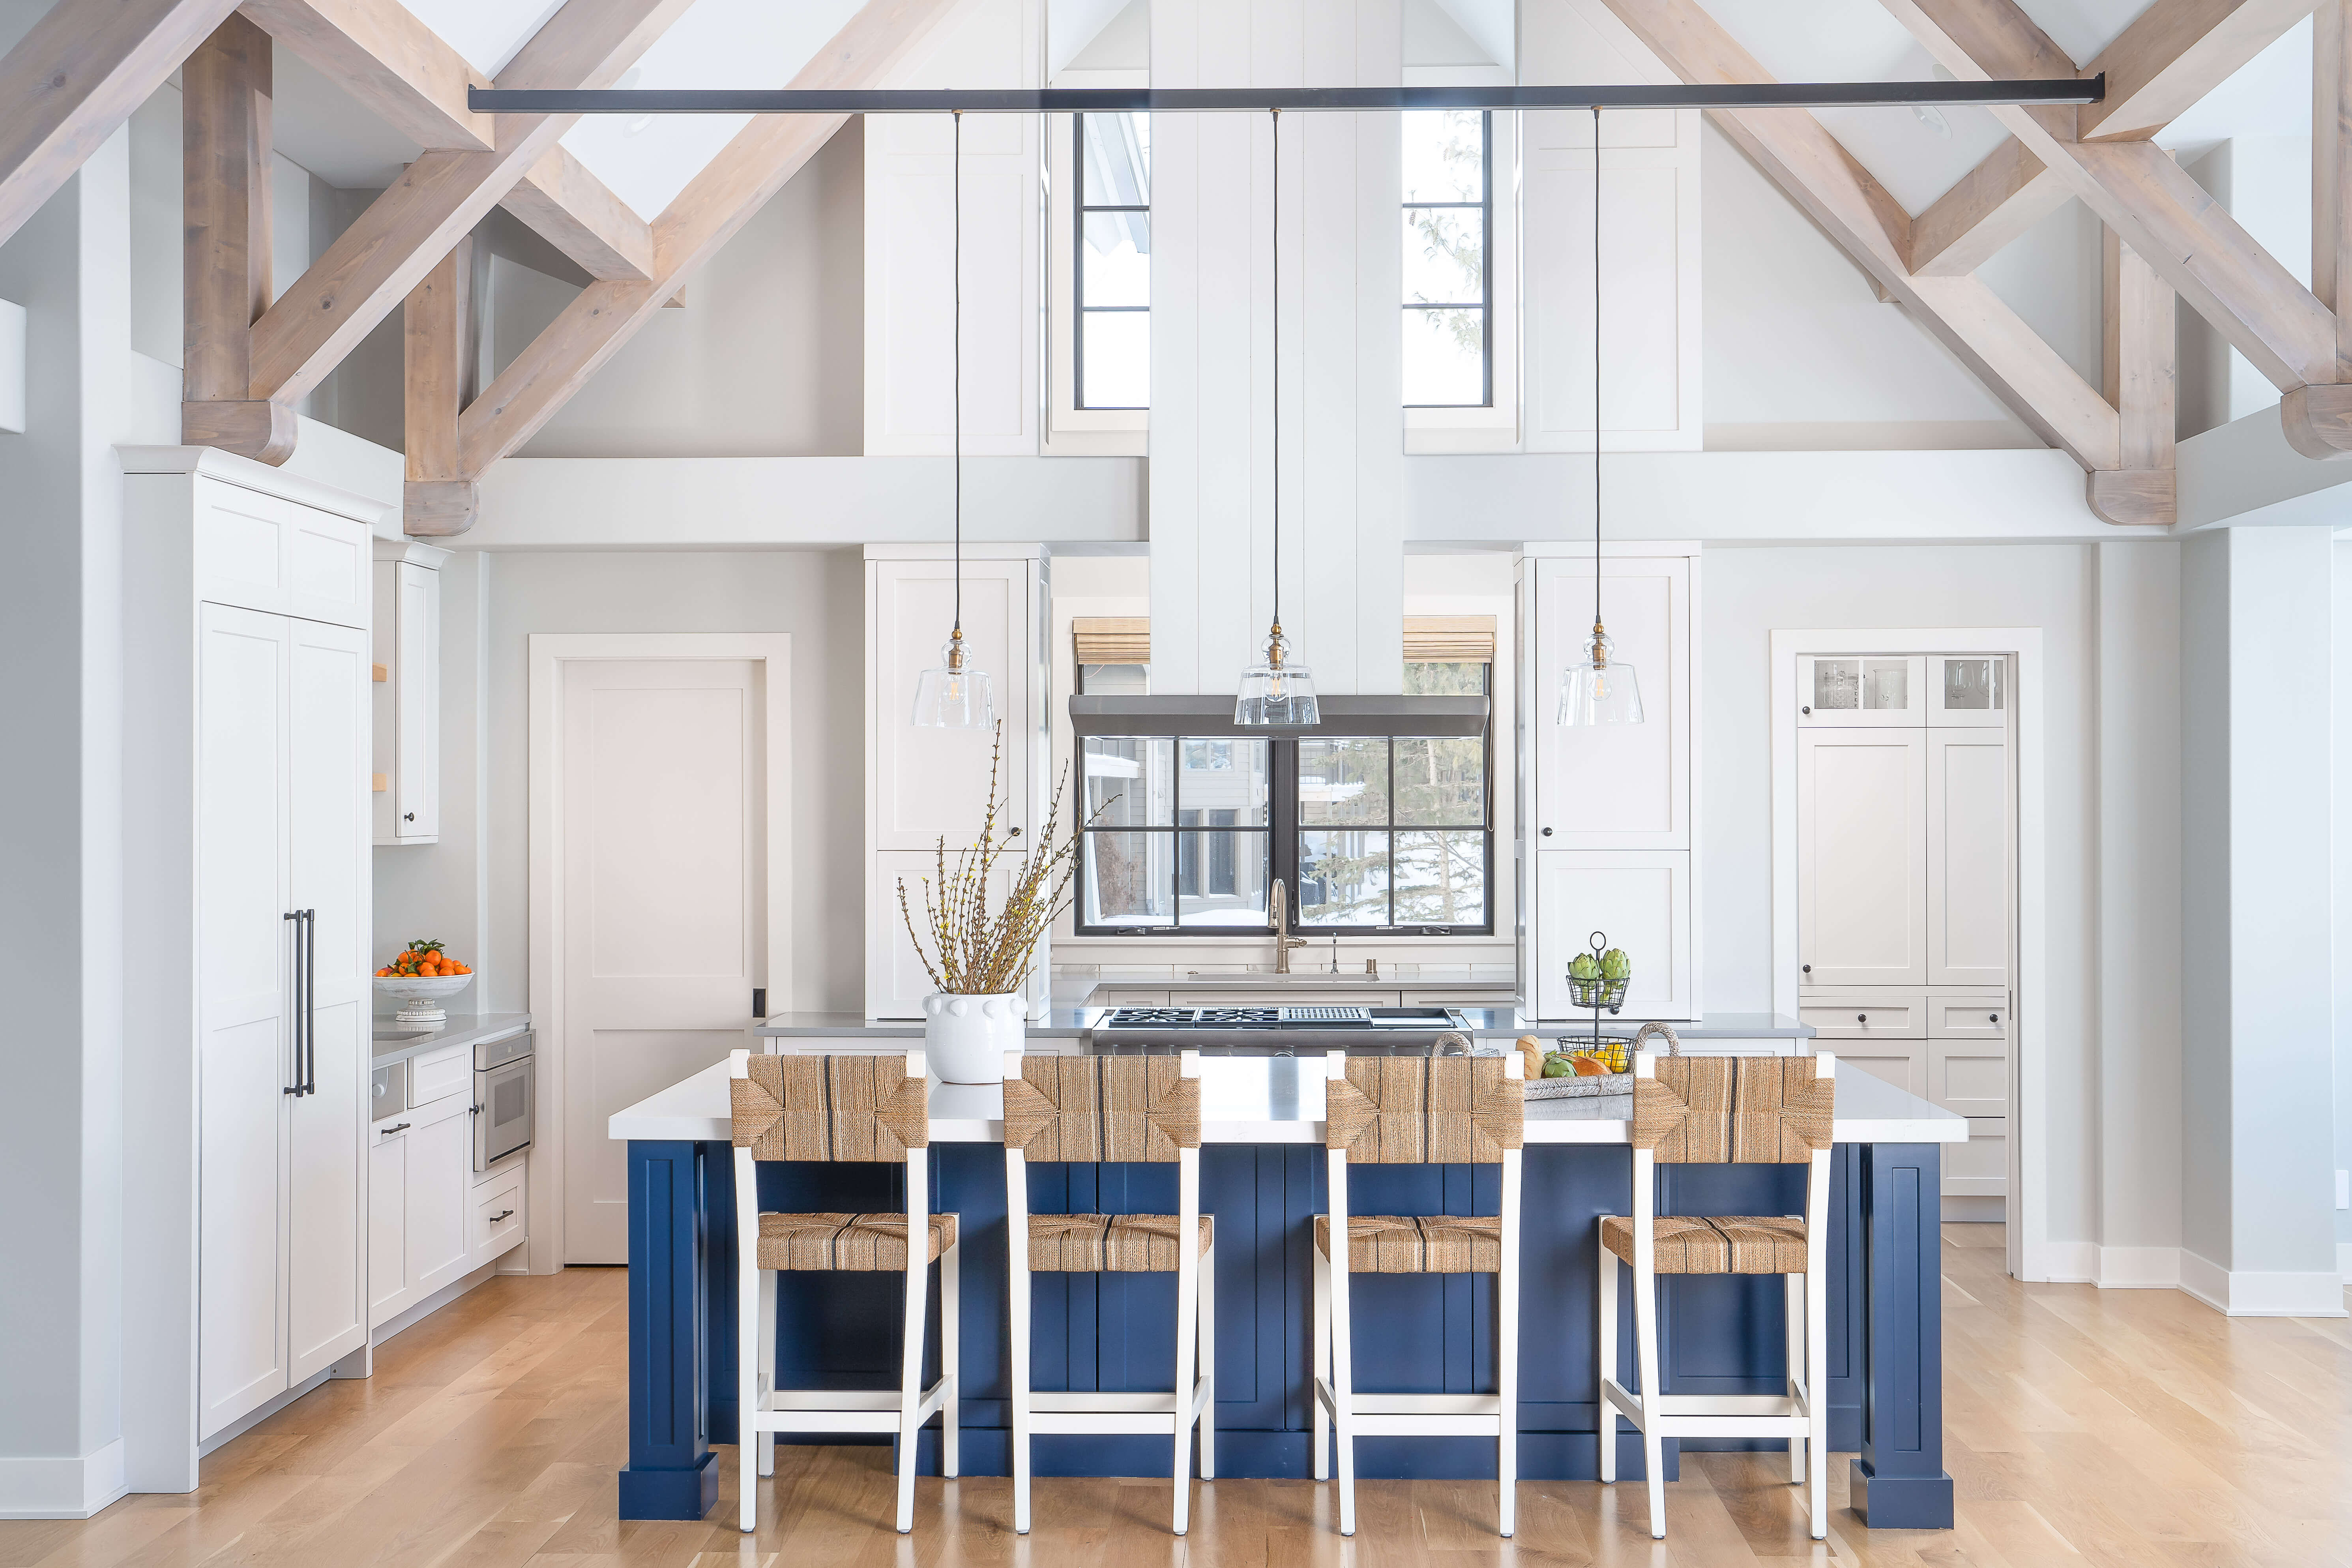 A bright white and blue modern farmhouse kitchen design with exposed ceiling beams, white painted cabinets, and blue kitchen island.